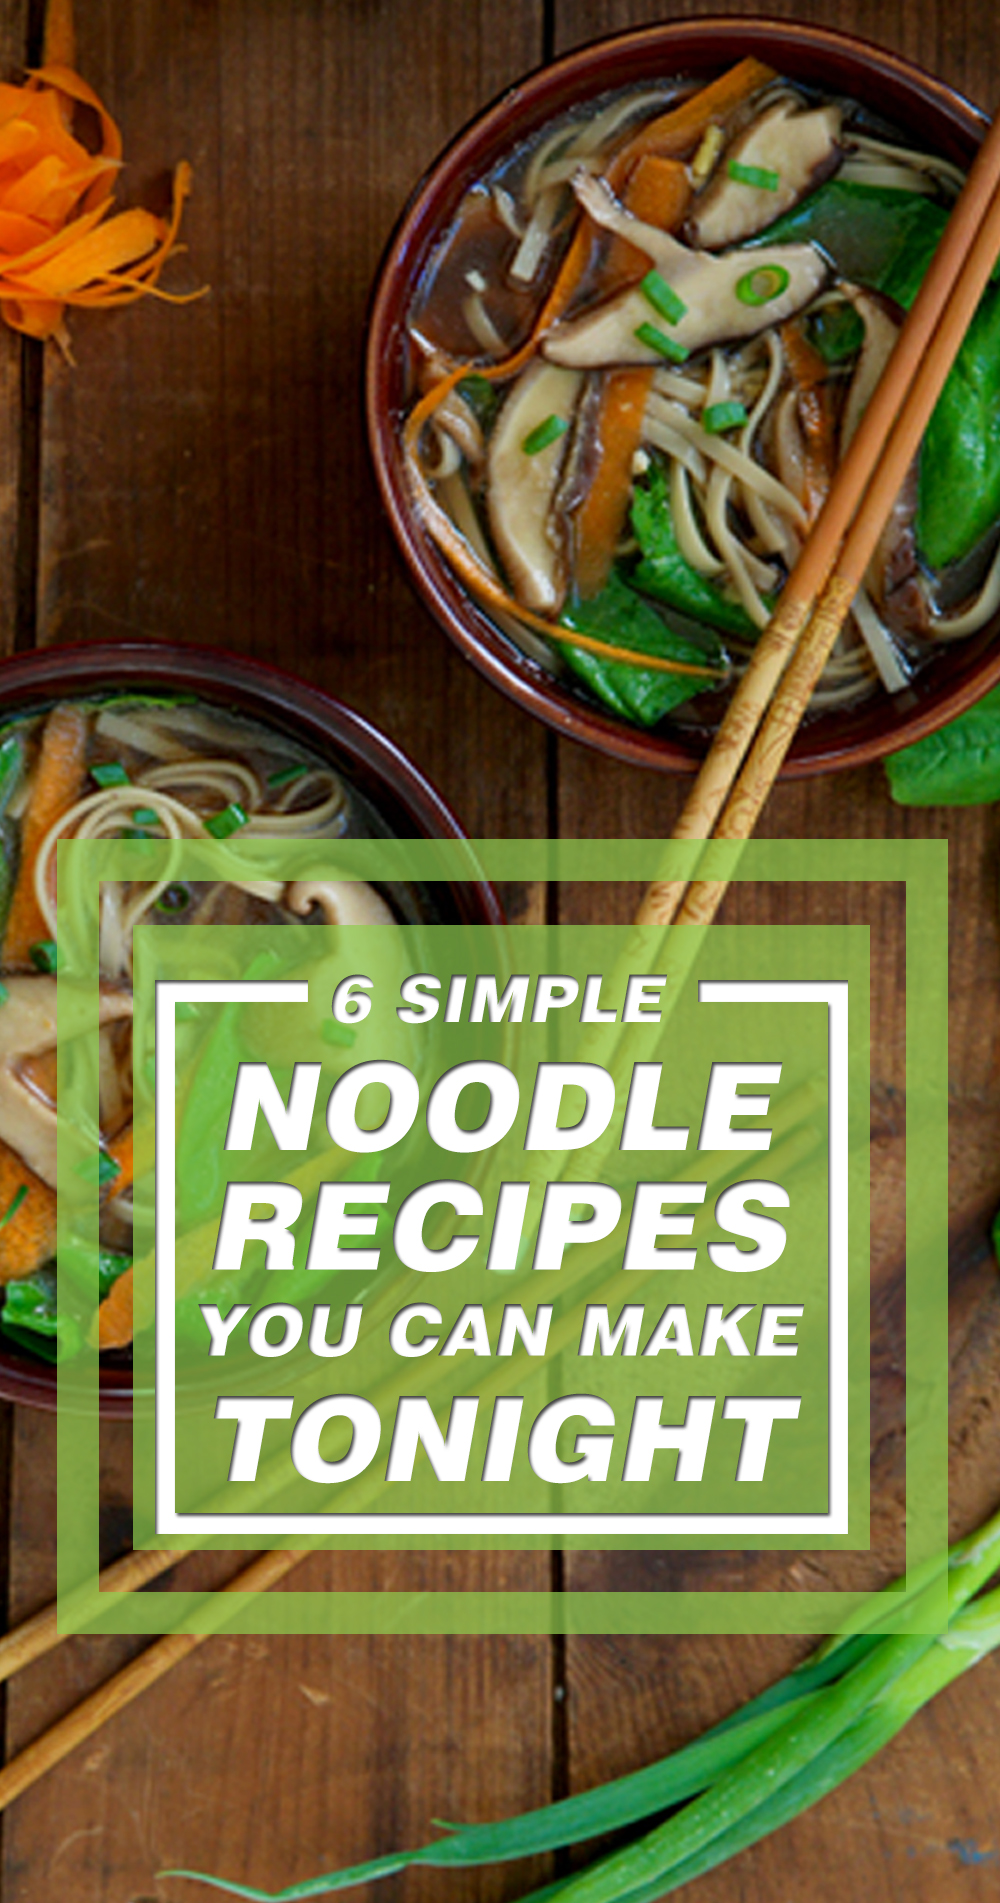 6 Simple Noodle Recipes You Can Make Tonight